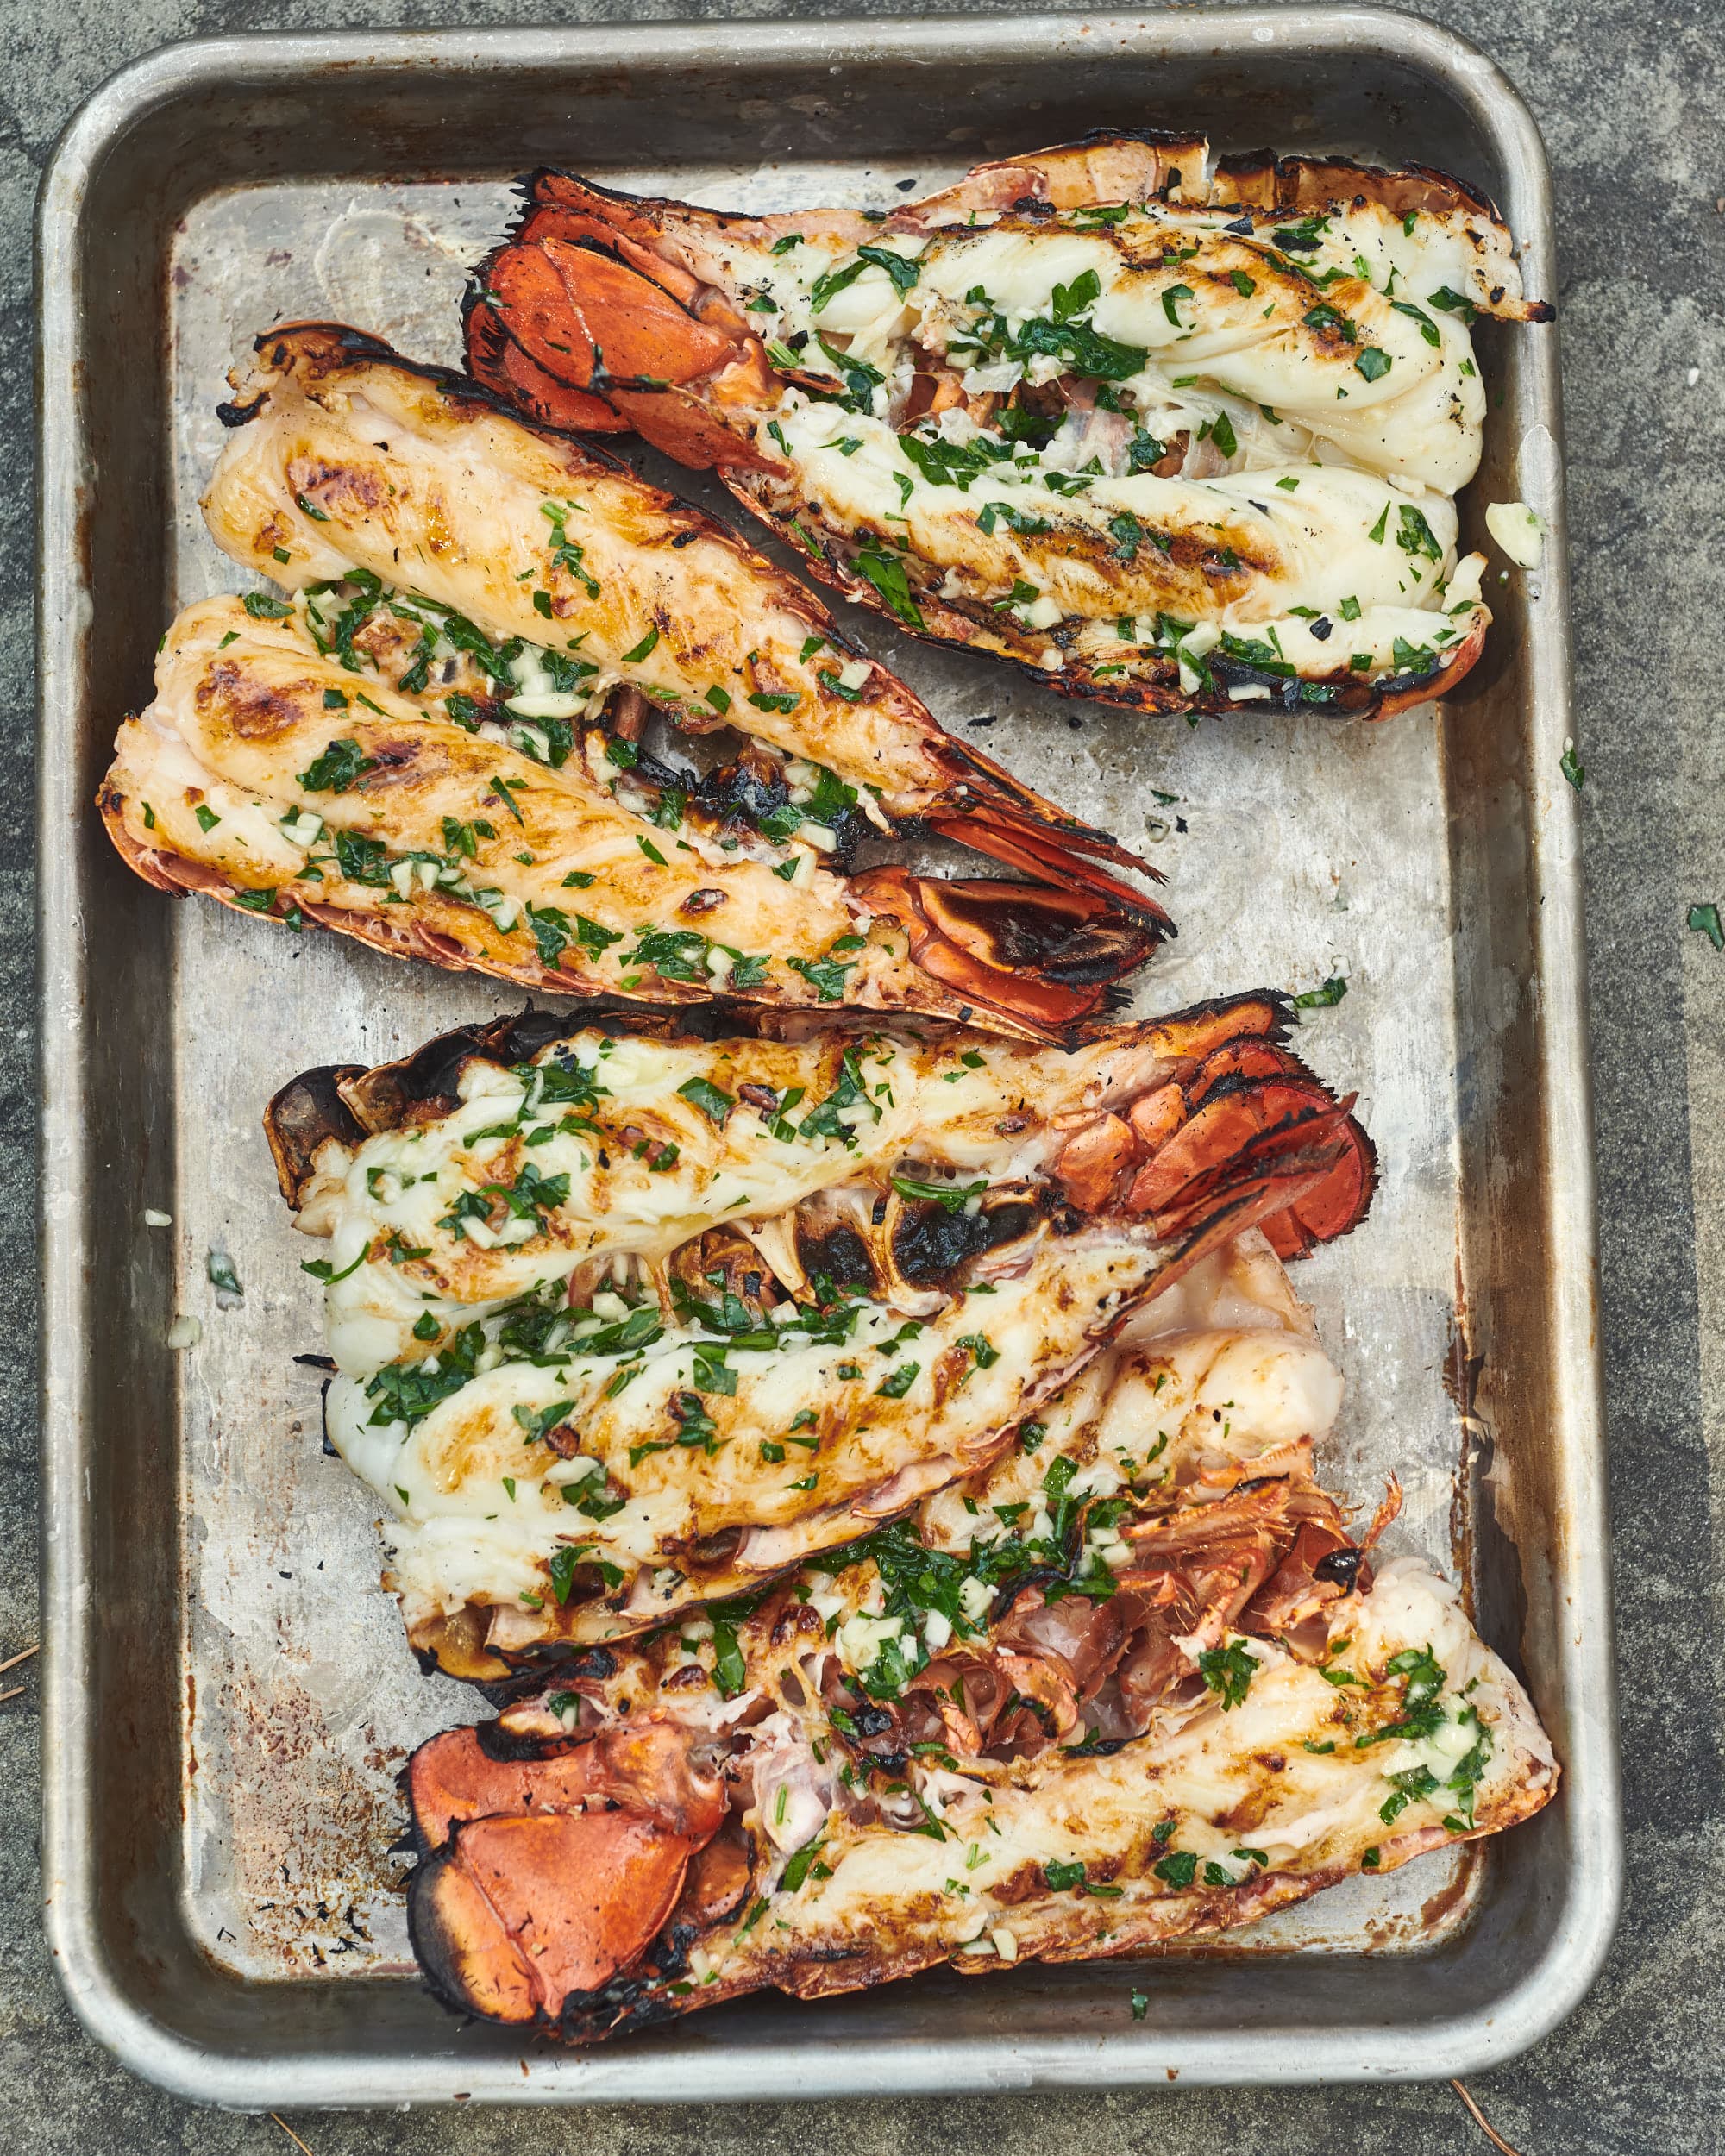 Barbecued Lobster with Garlic Butter